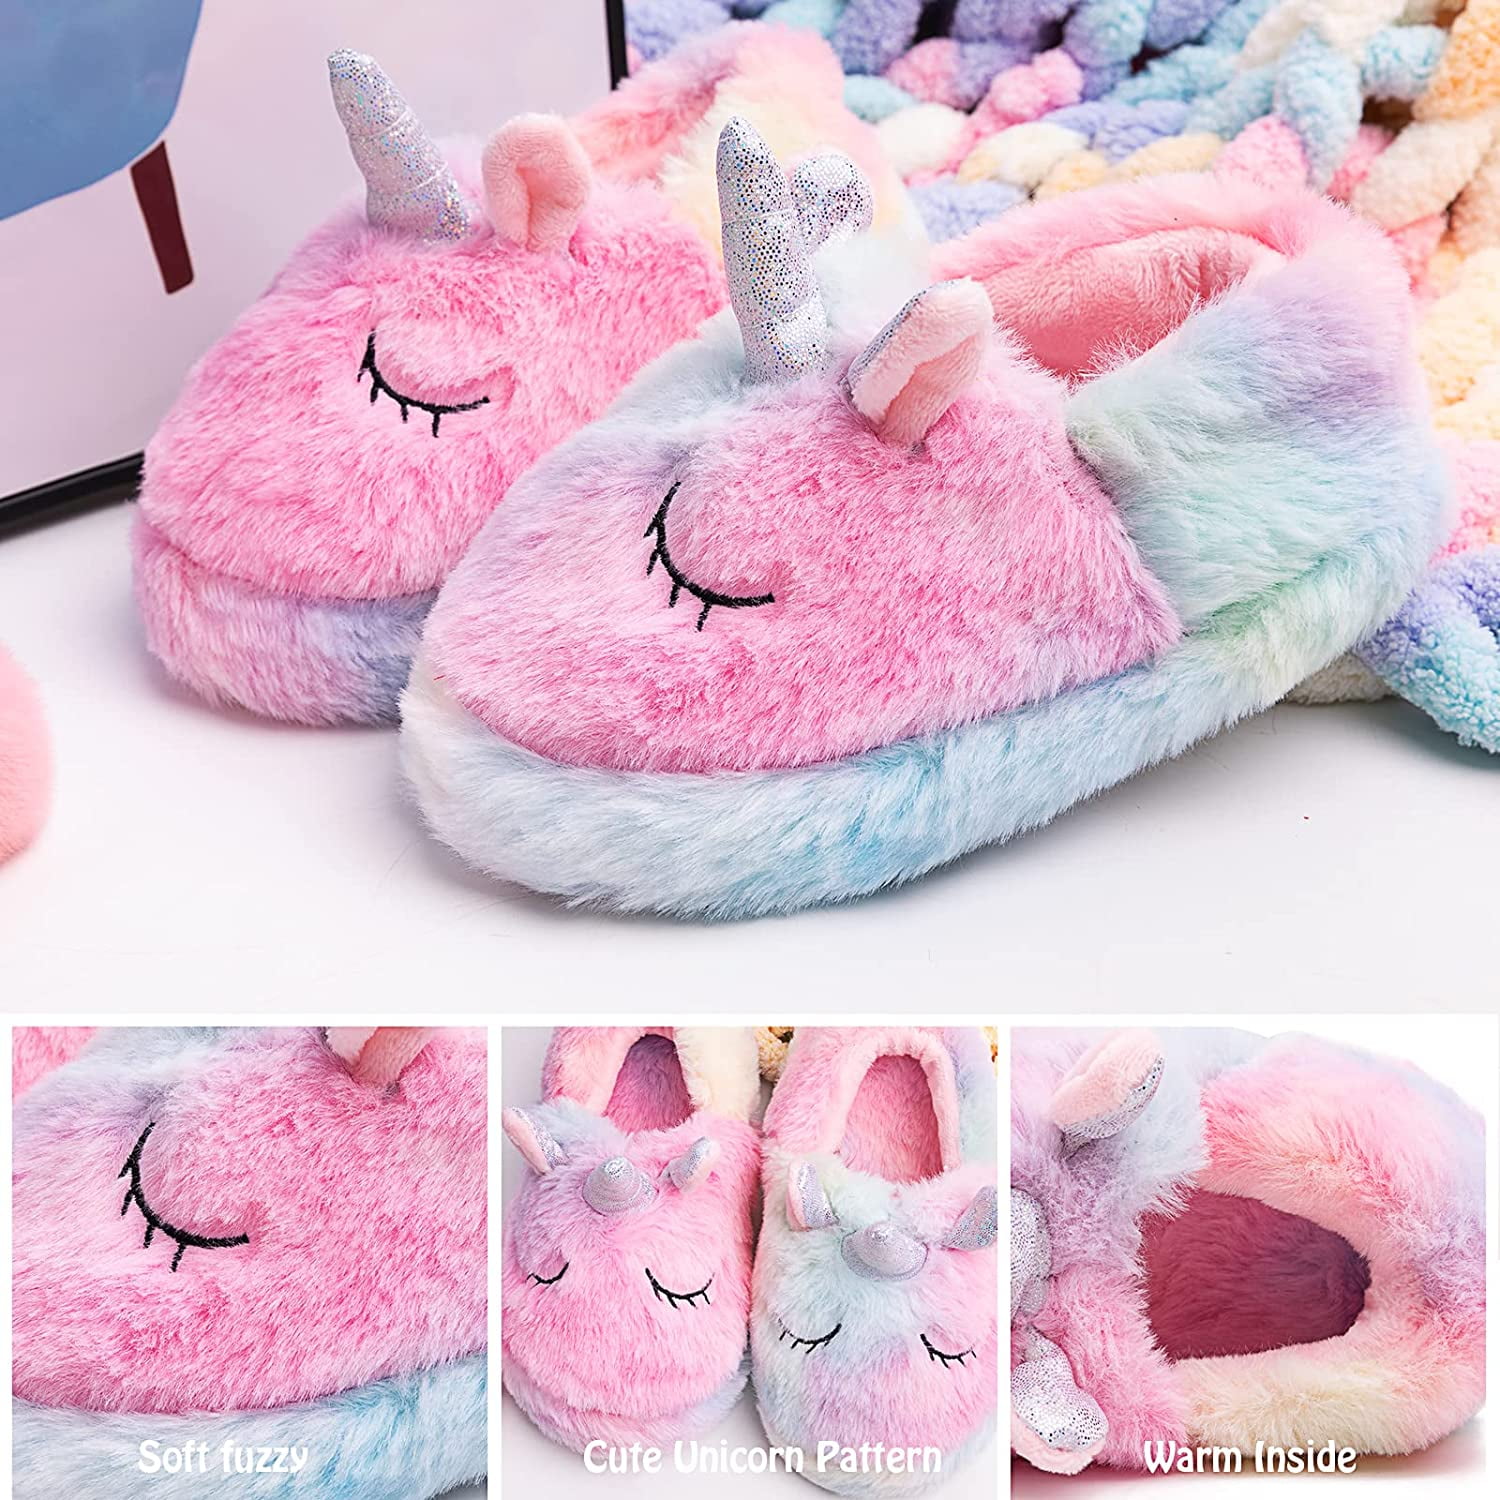 Summer Beach Flip Flops For Kids: Fashionable Bear Eva Platform Soft Cloud  Pusheen Slippers Shoes For Girls And Boys L230518 From Sts_013, $14.4 |  DHgate.Com